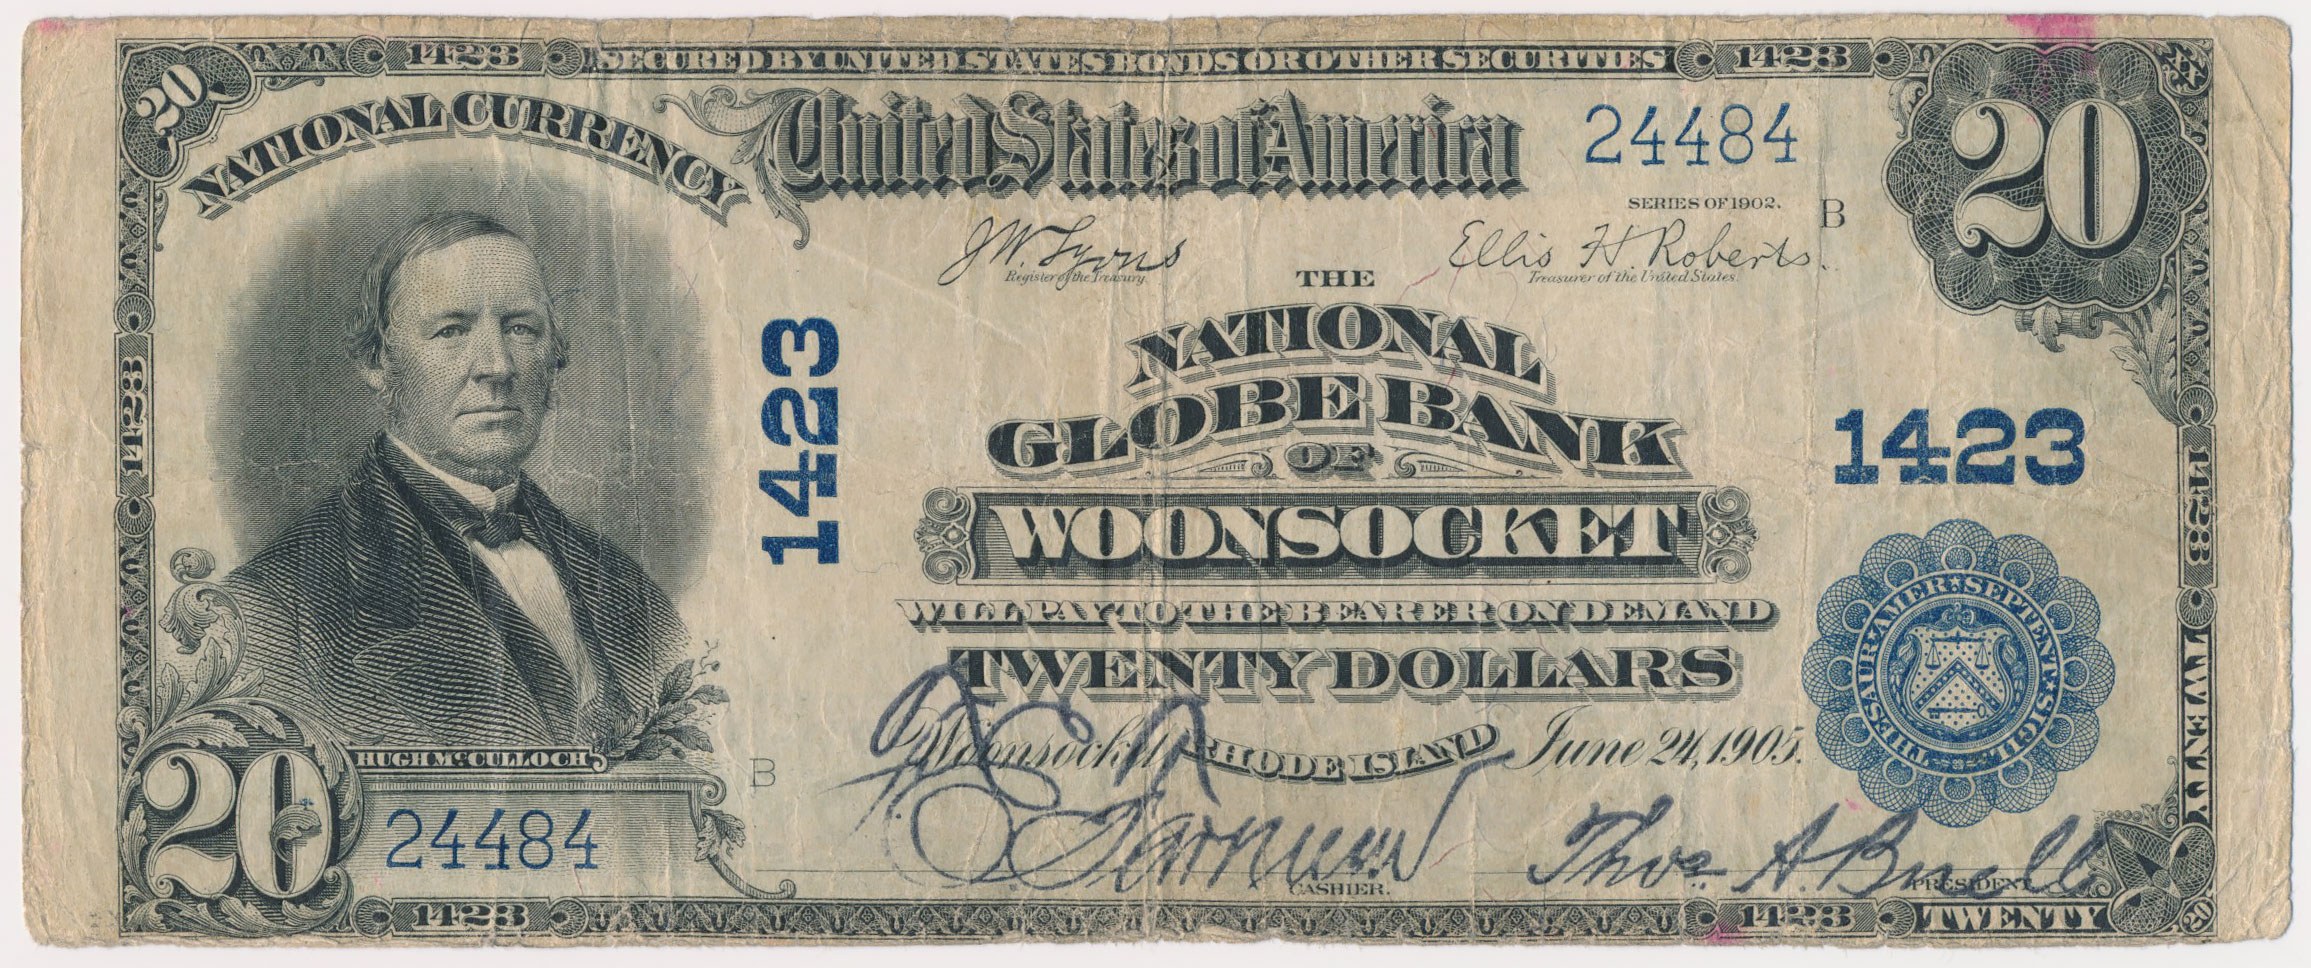 National currency